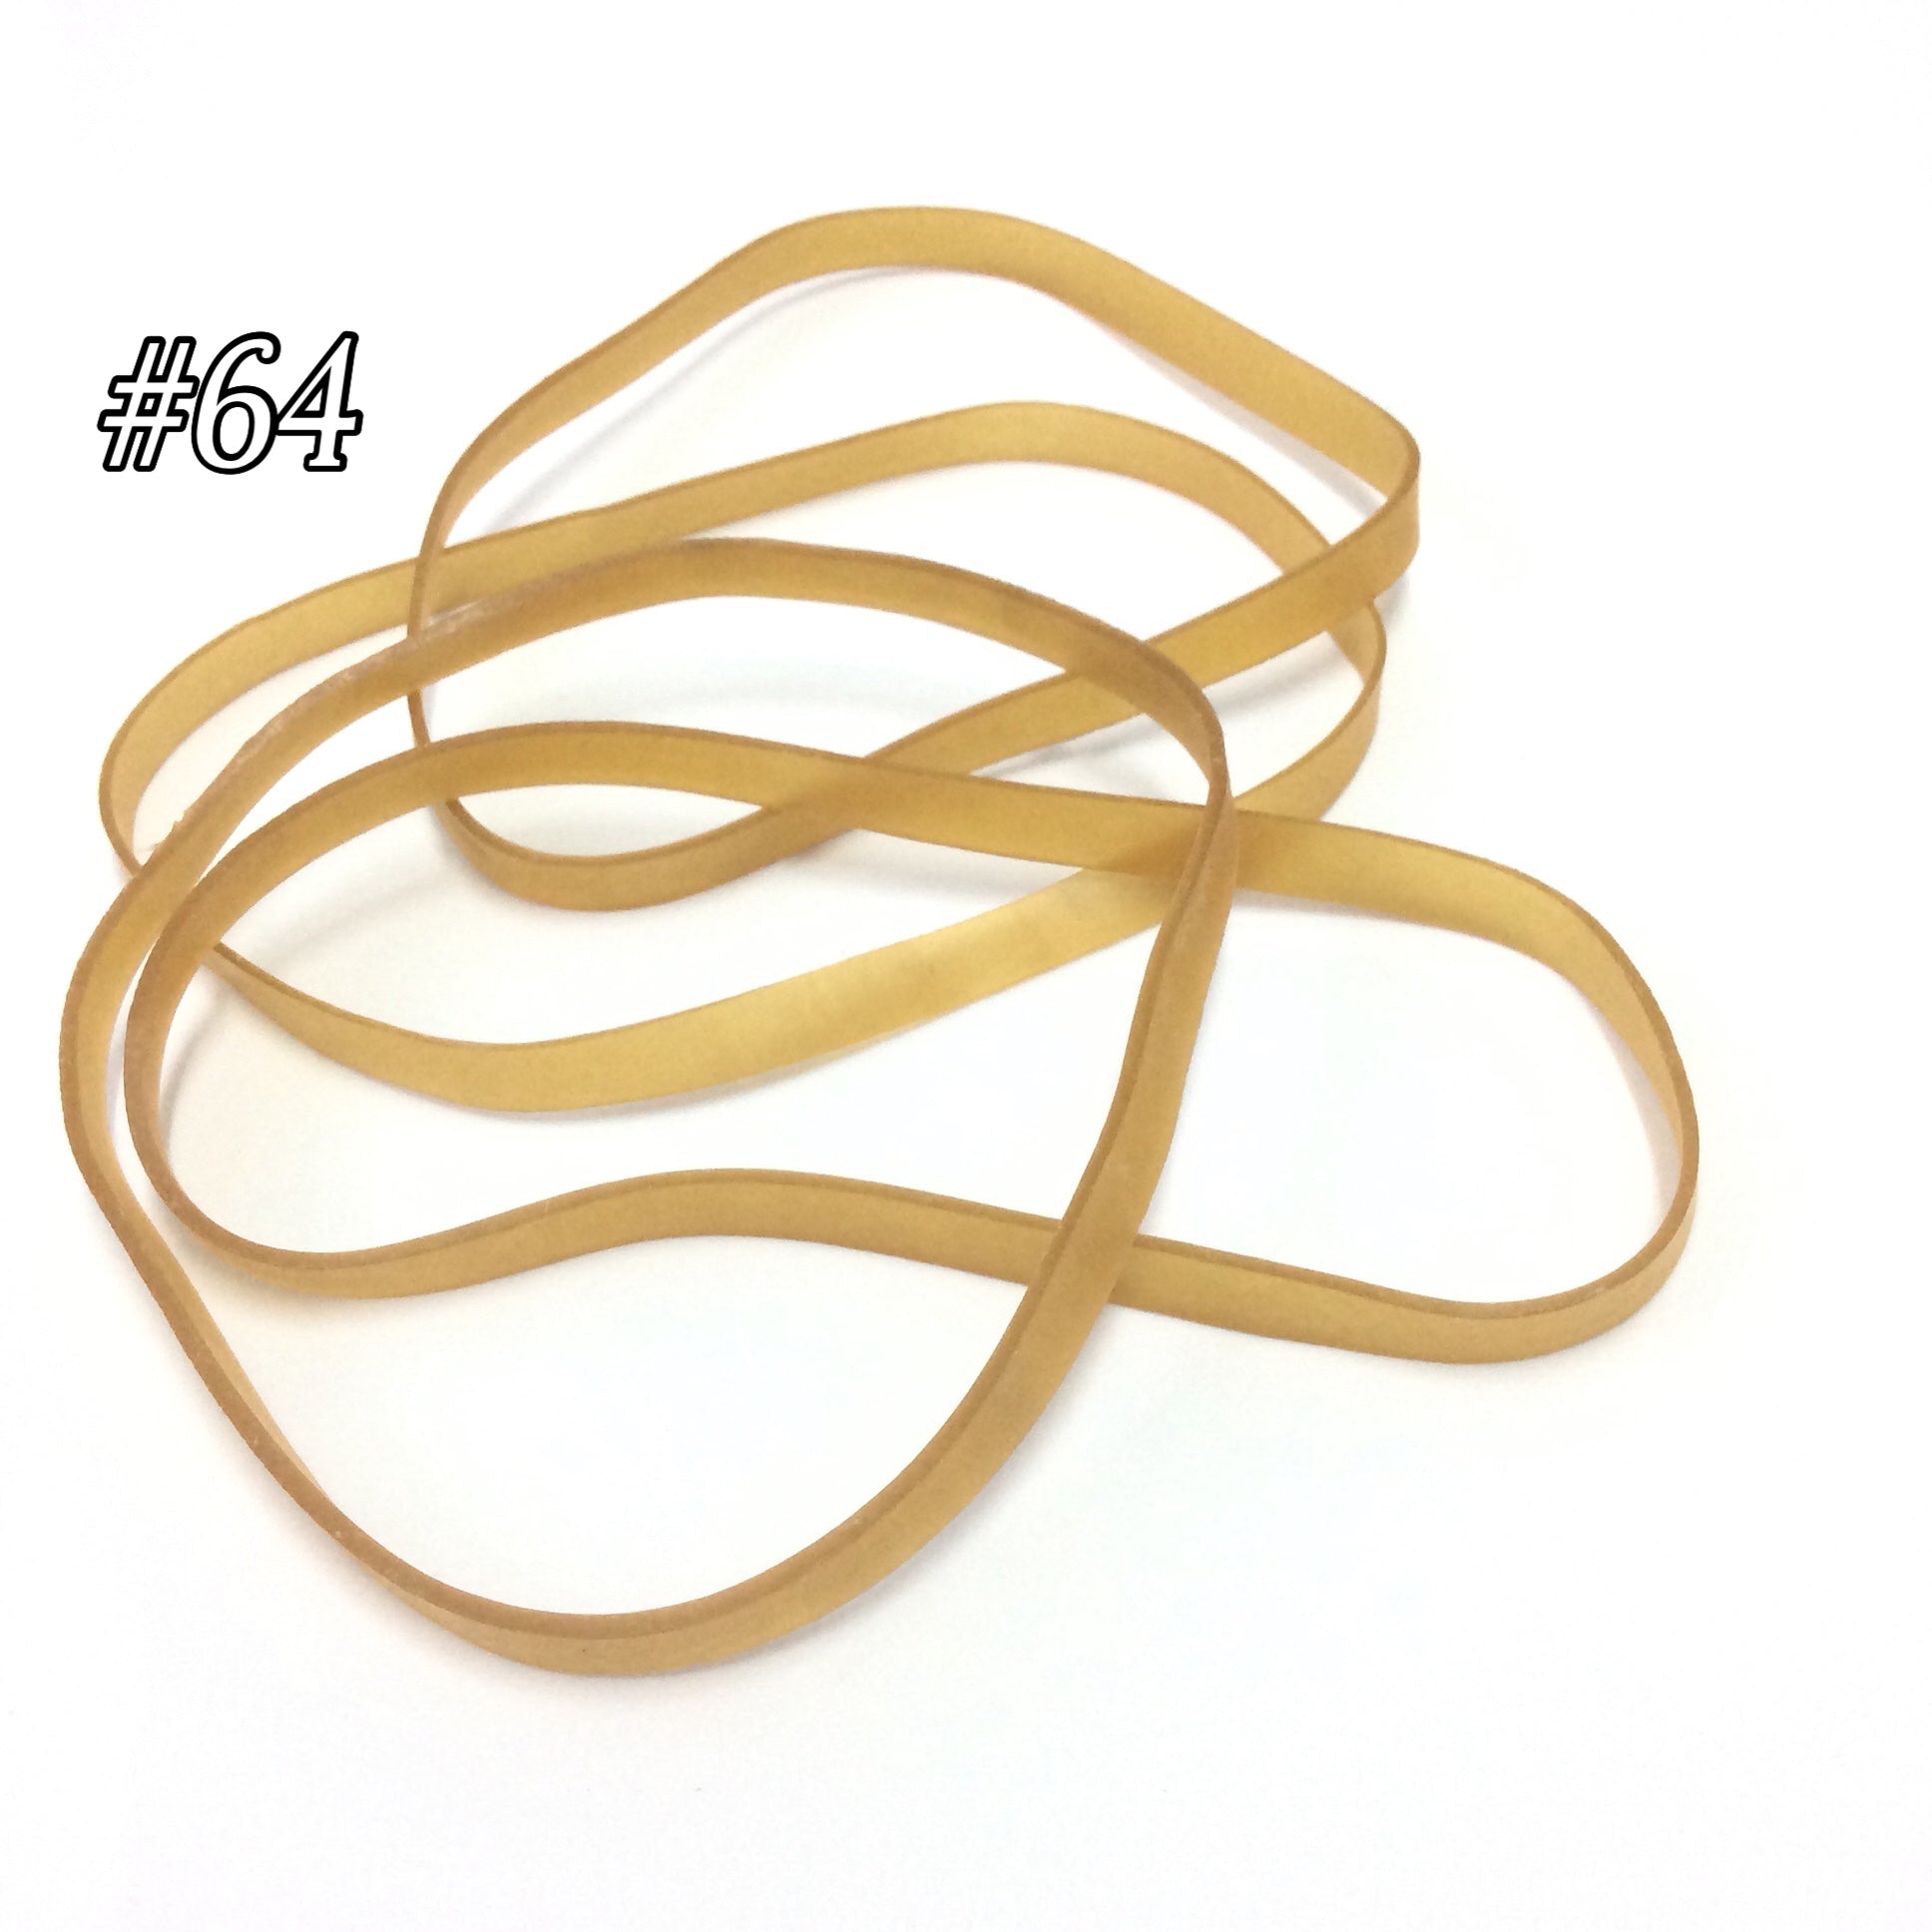 Rubber Band 64" 40/1/4#